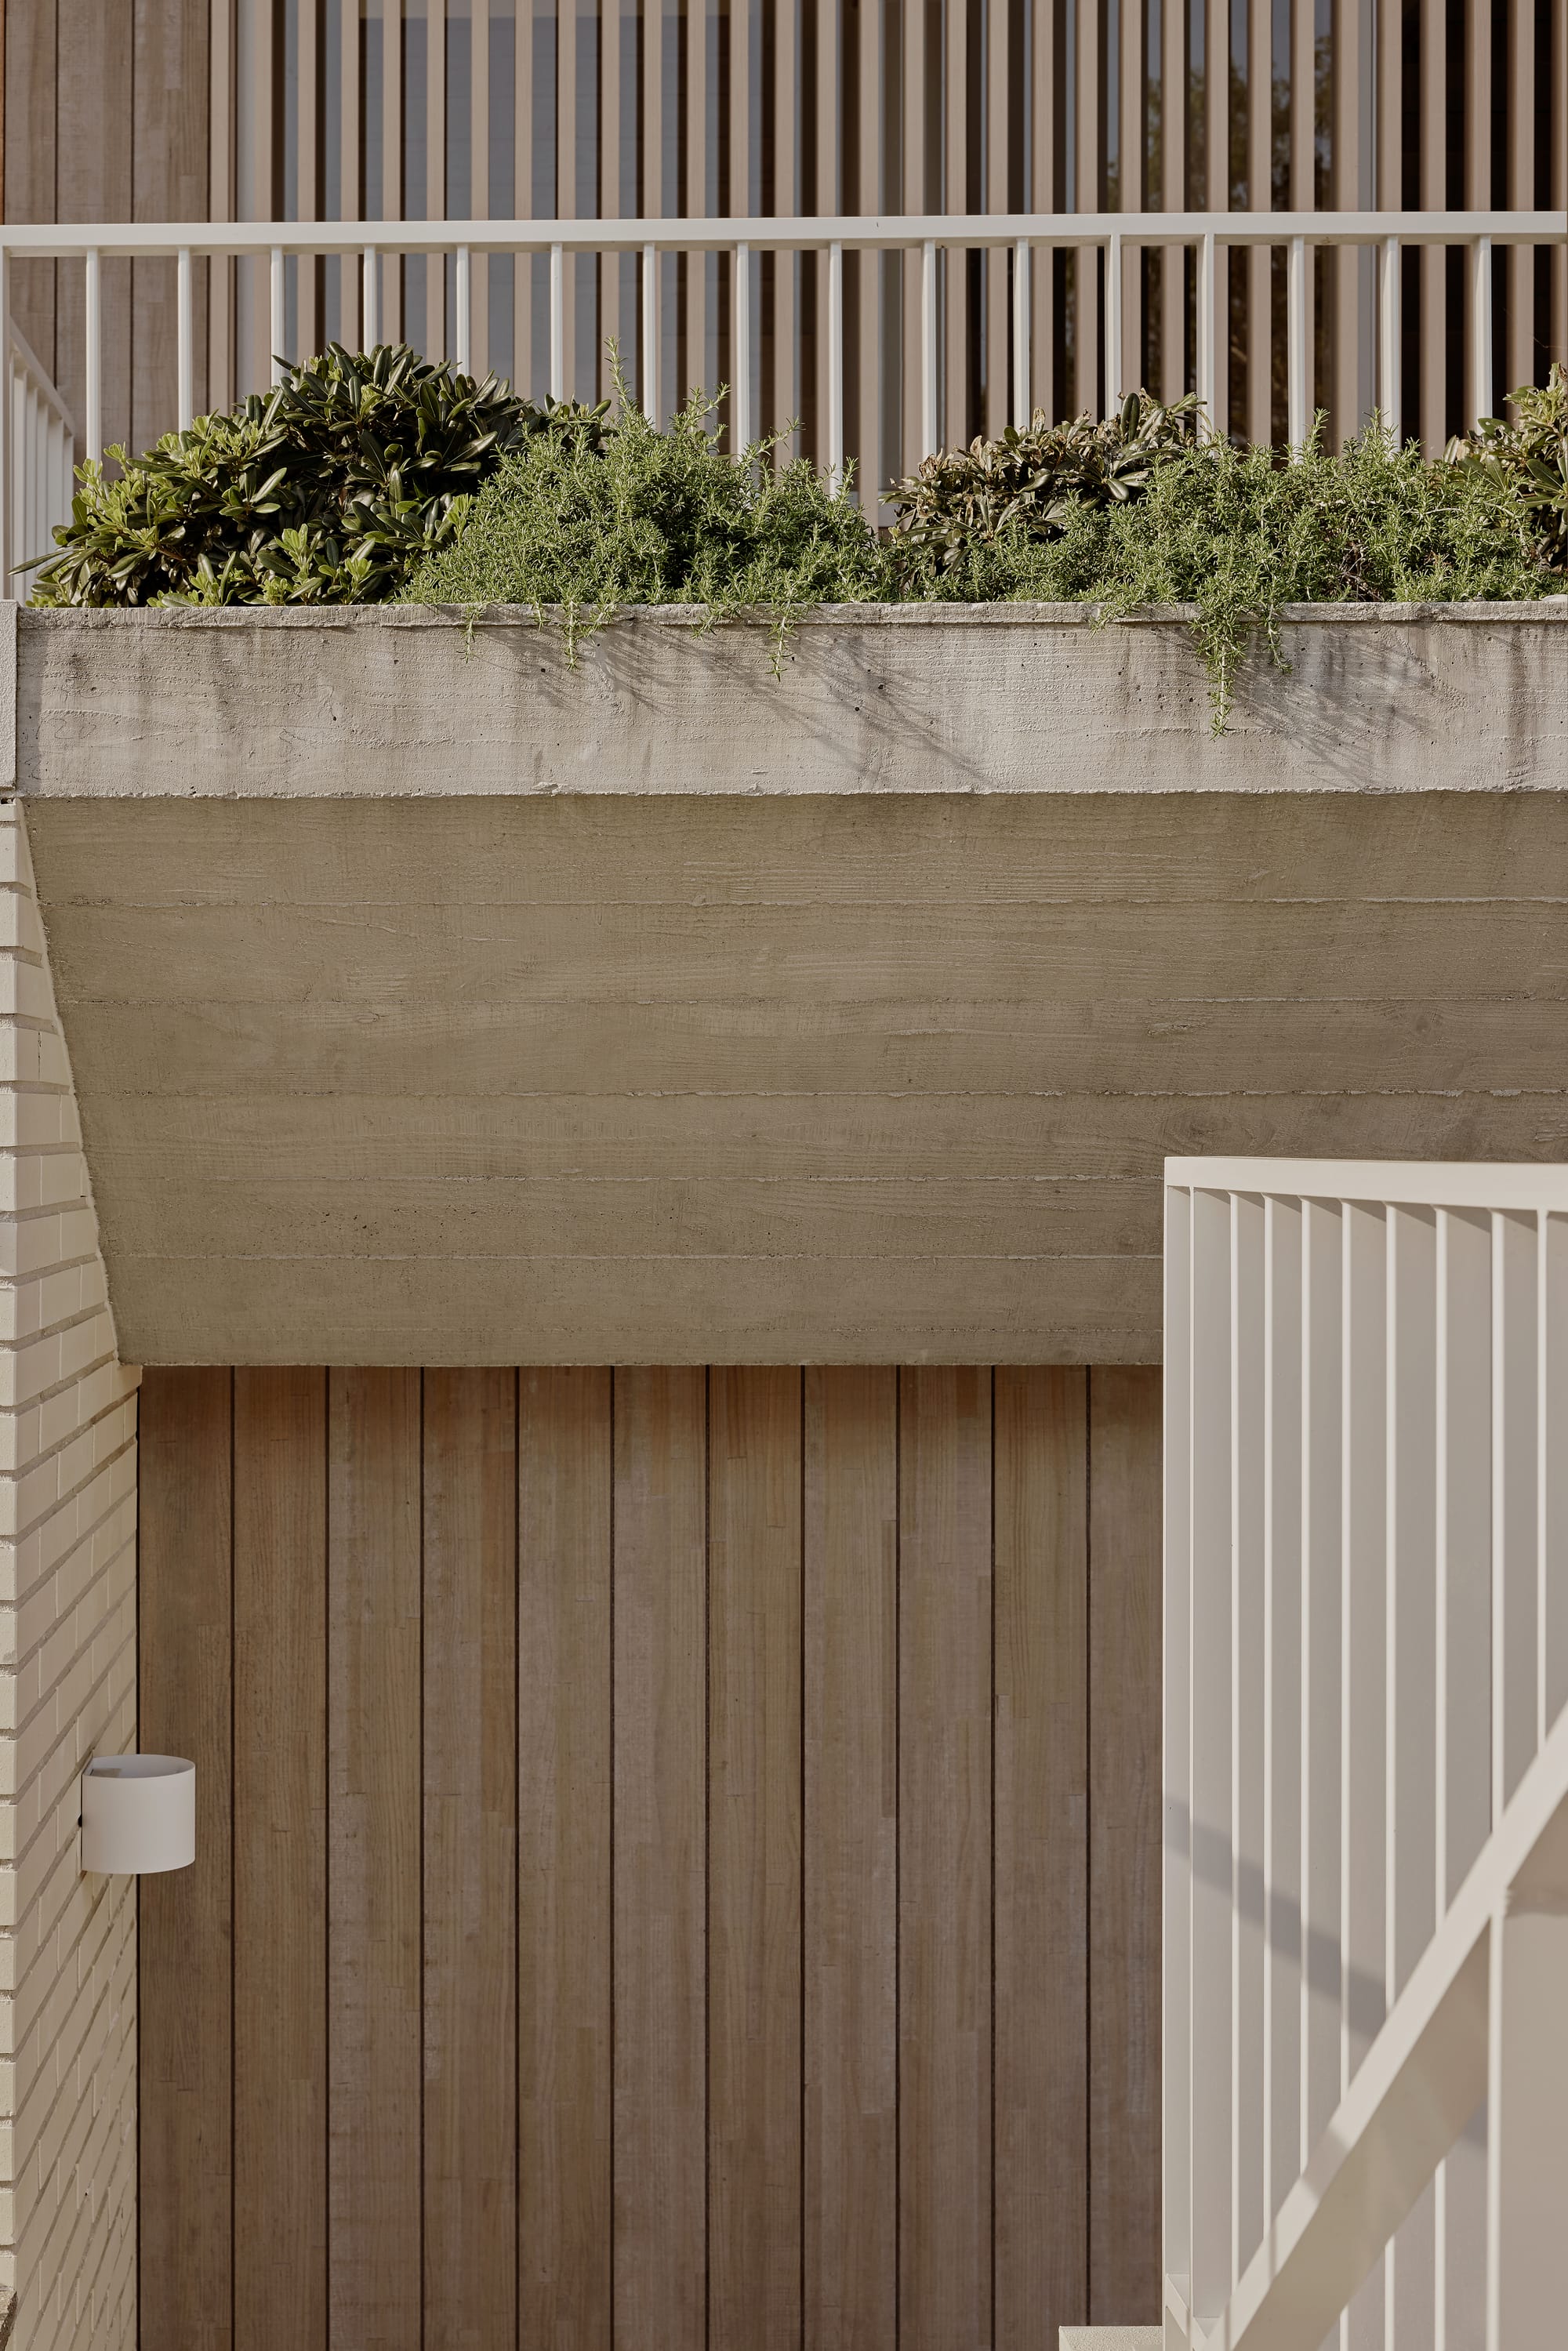  Hill Courtyard House by Kelder Architects. Photography by Brock Beazley Photography. Close up of timber garage door with concrete garden bed above. white railing for balcony behind garden bed. 